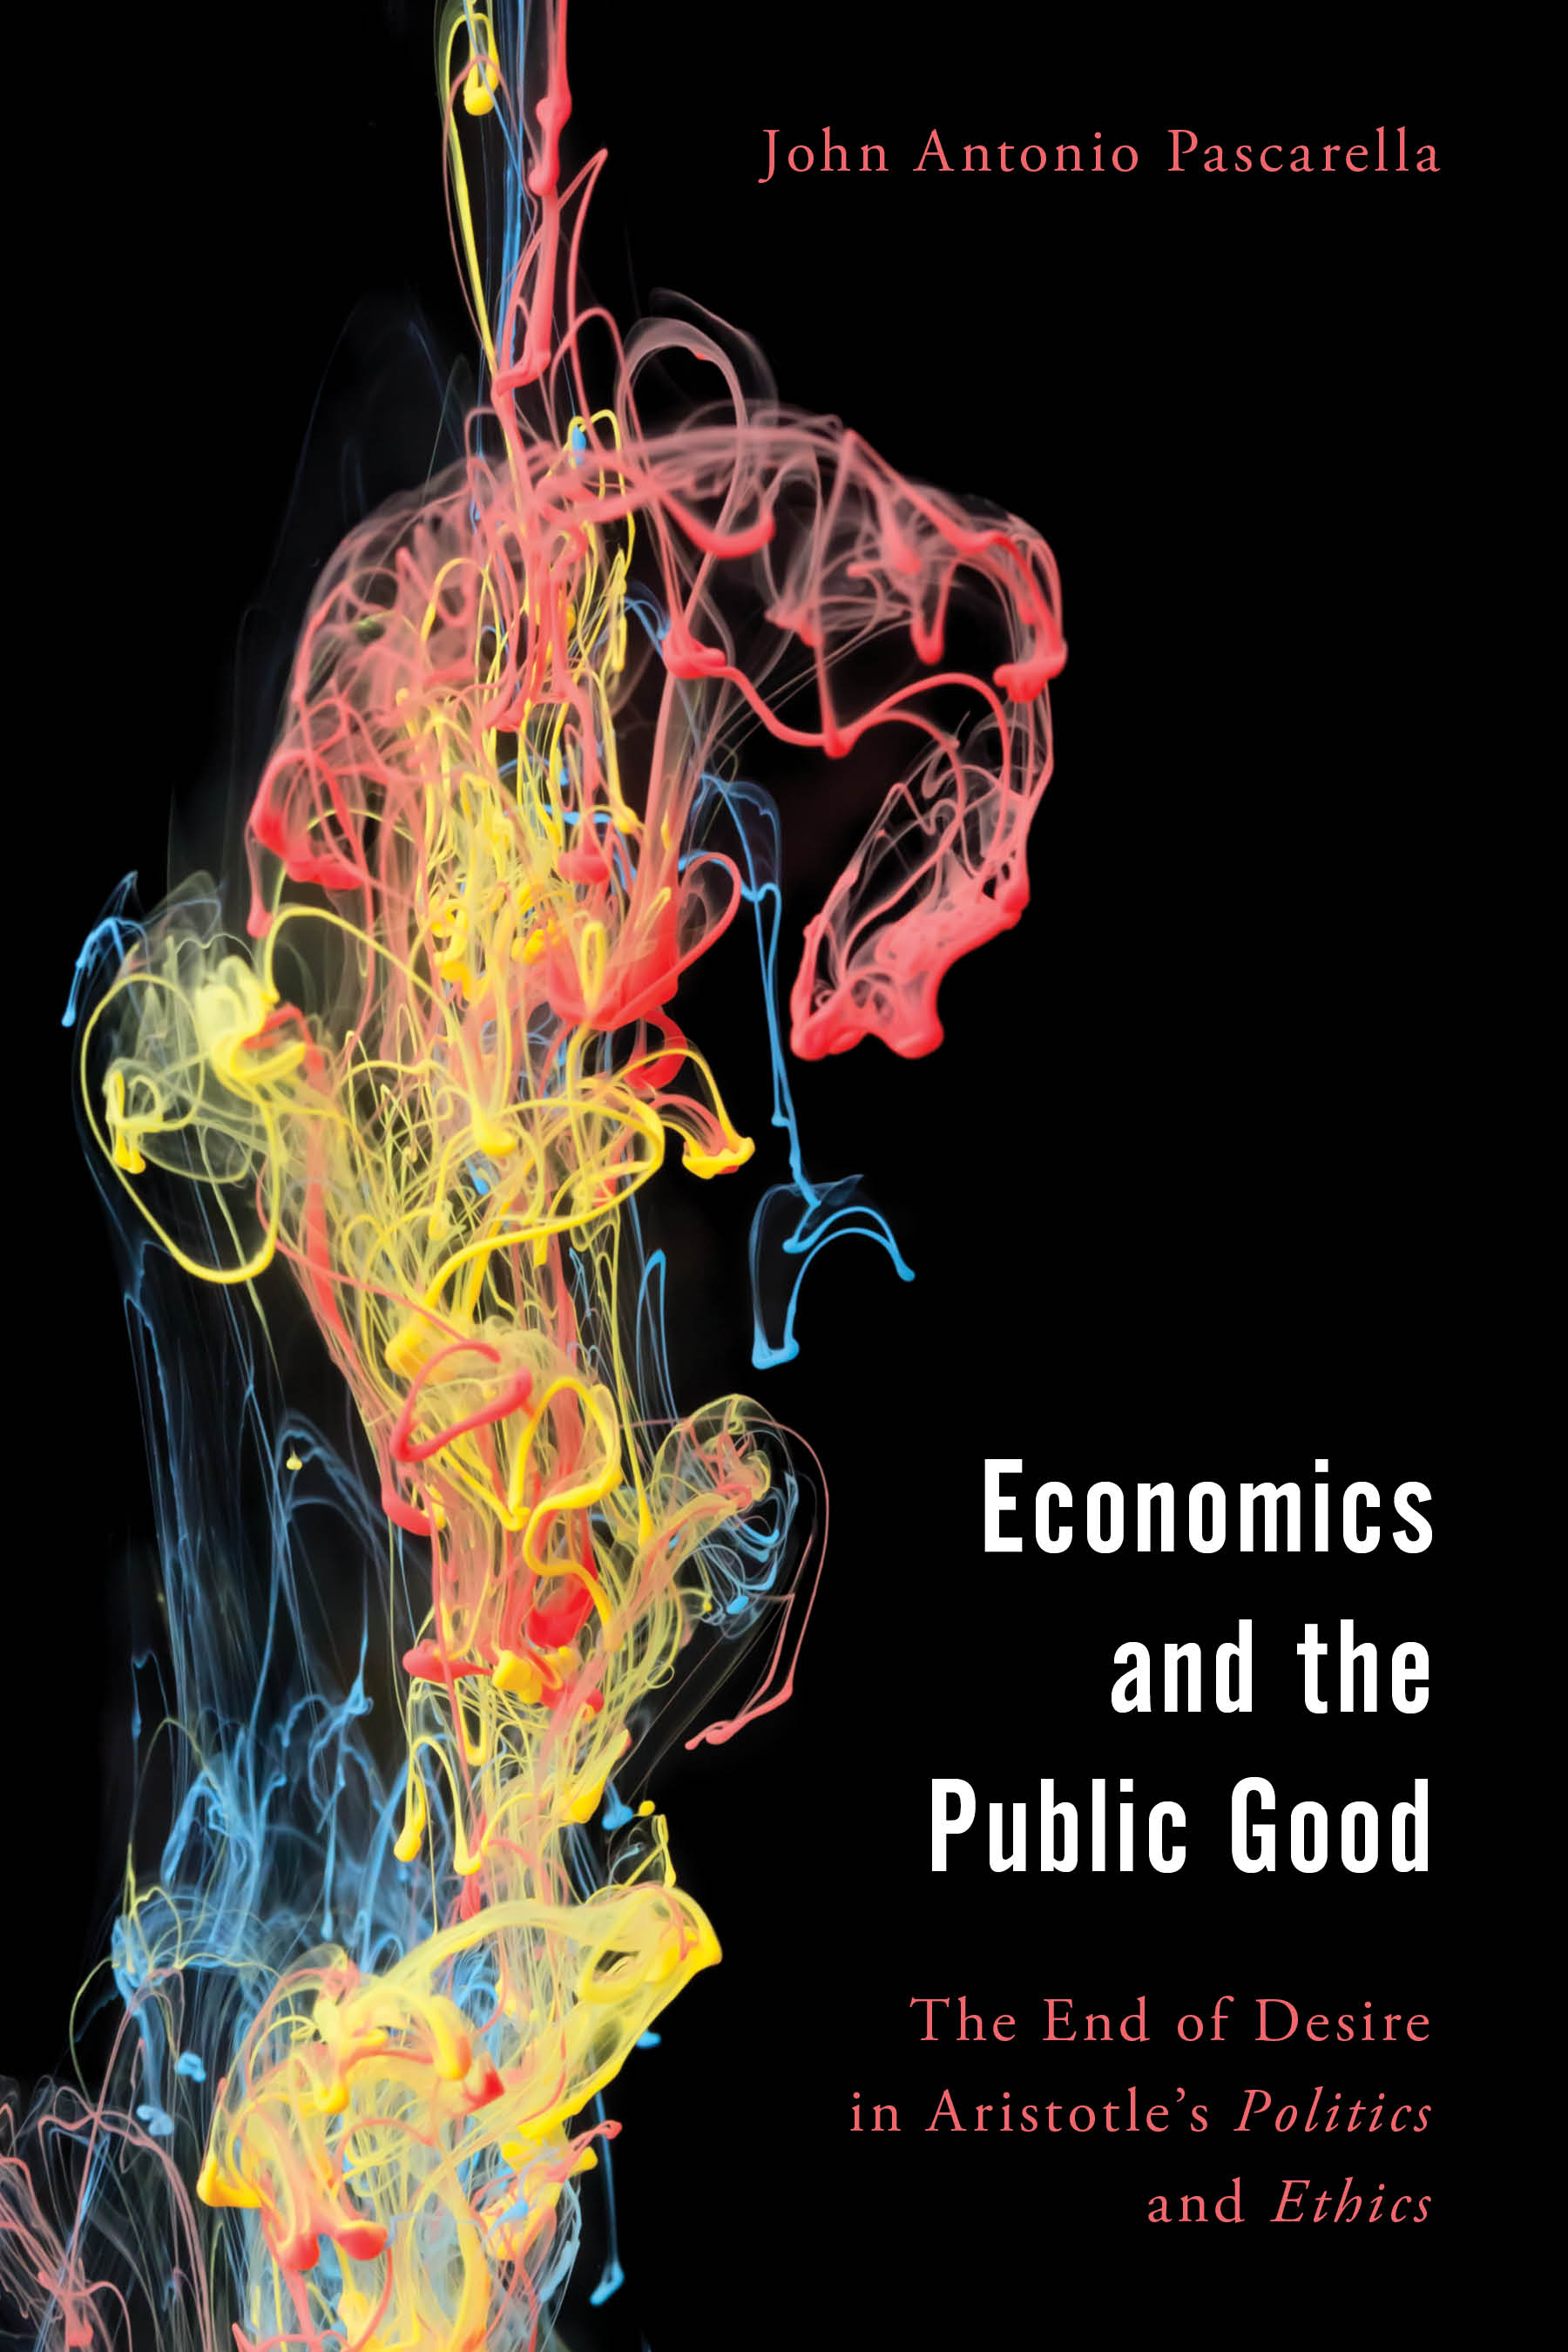 Economics and the Public Good: The End of Desire in Aristotle's Politics and Ethics